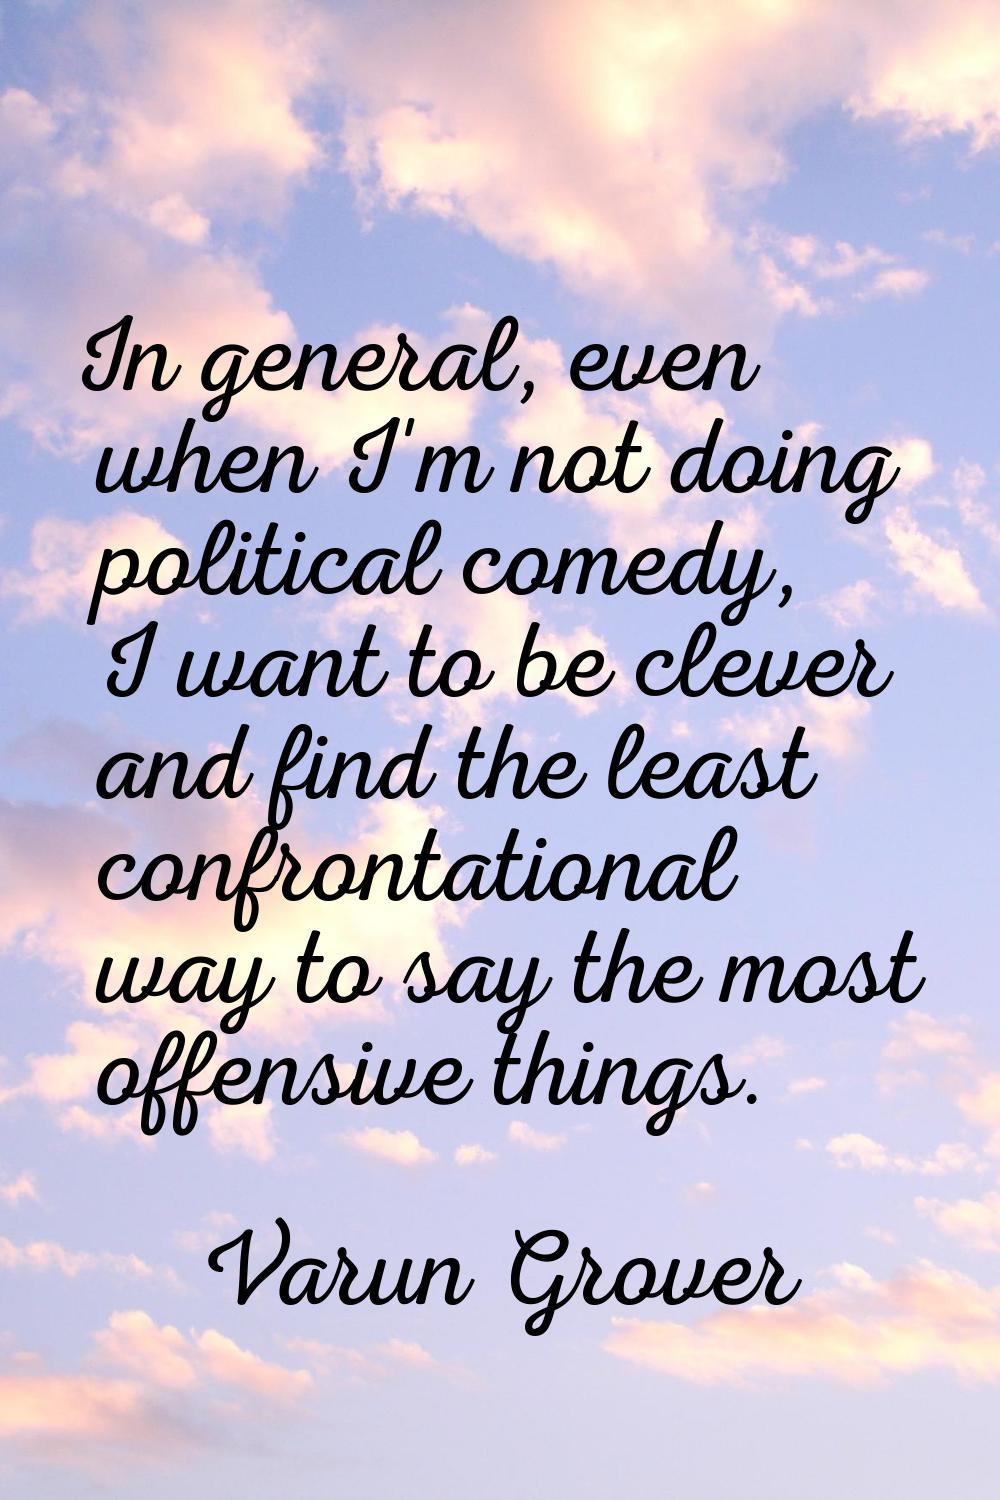 In general, even when I'm not doing political comedy, I want to be clever and find the least confro